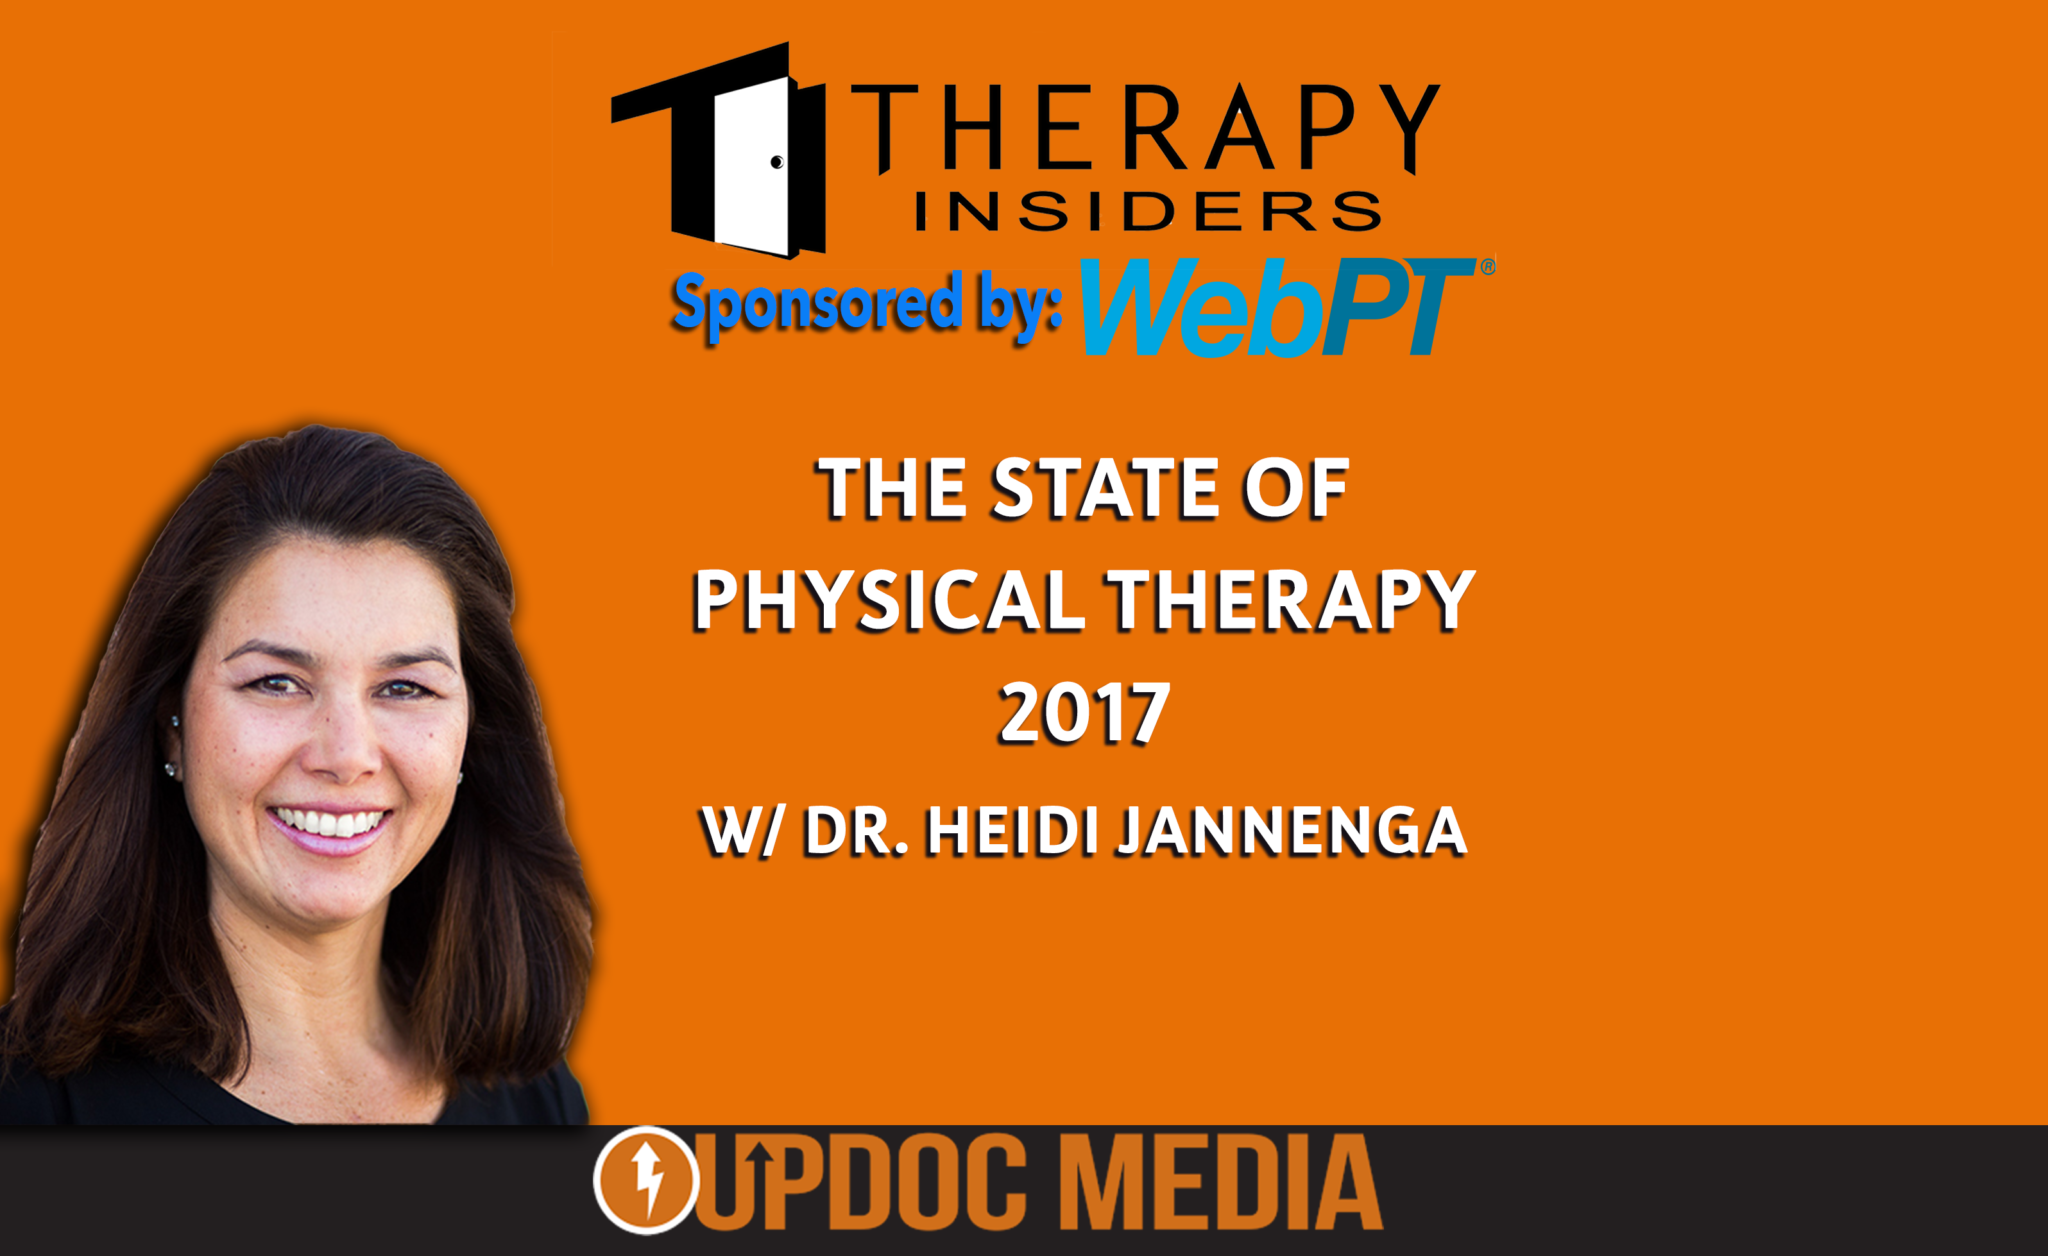 heidi Jannenga on therapy insiders podcast physical therapy